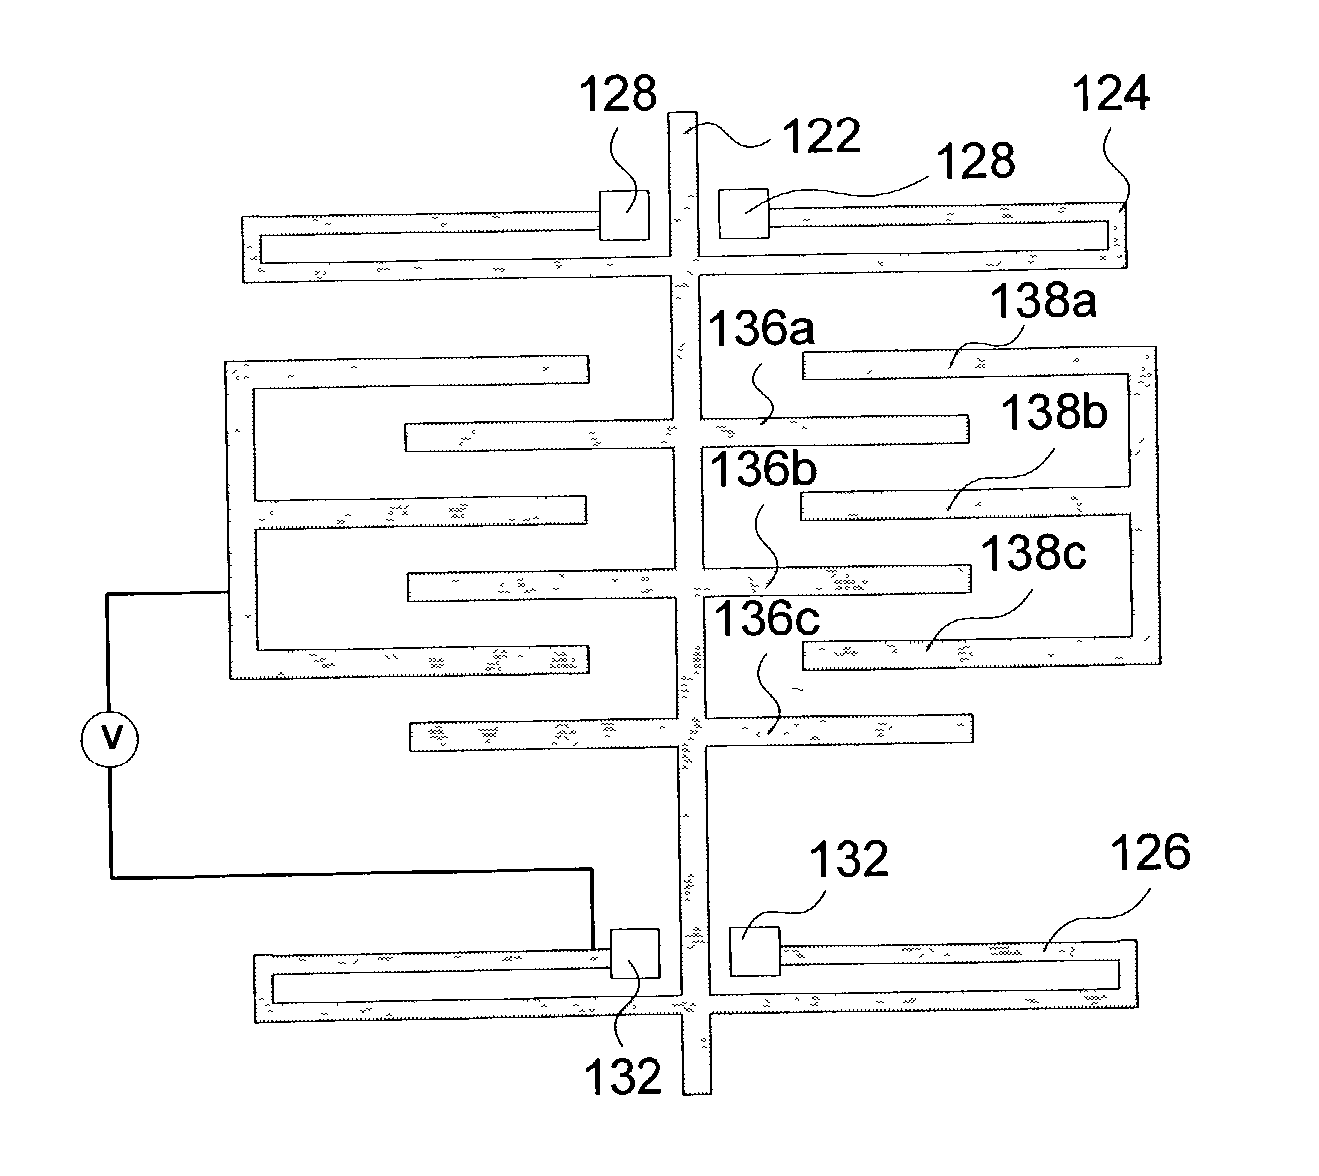 Complex microdevices and apparatus and methods for fabricating such devices